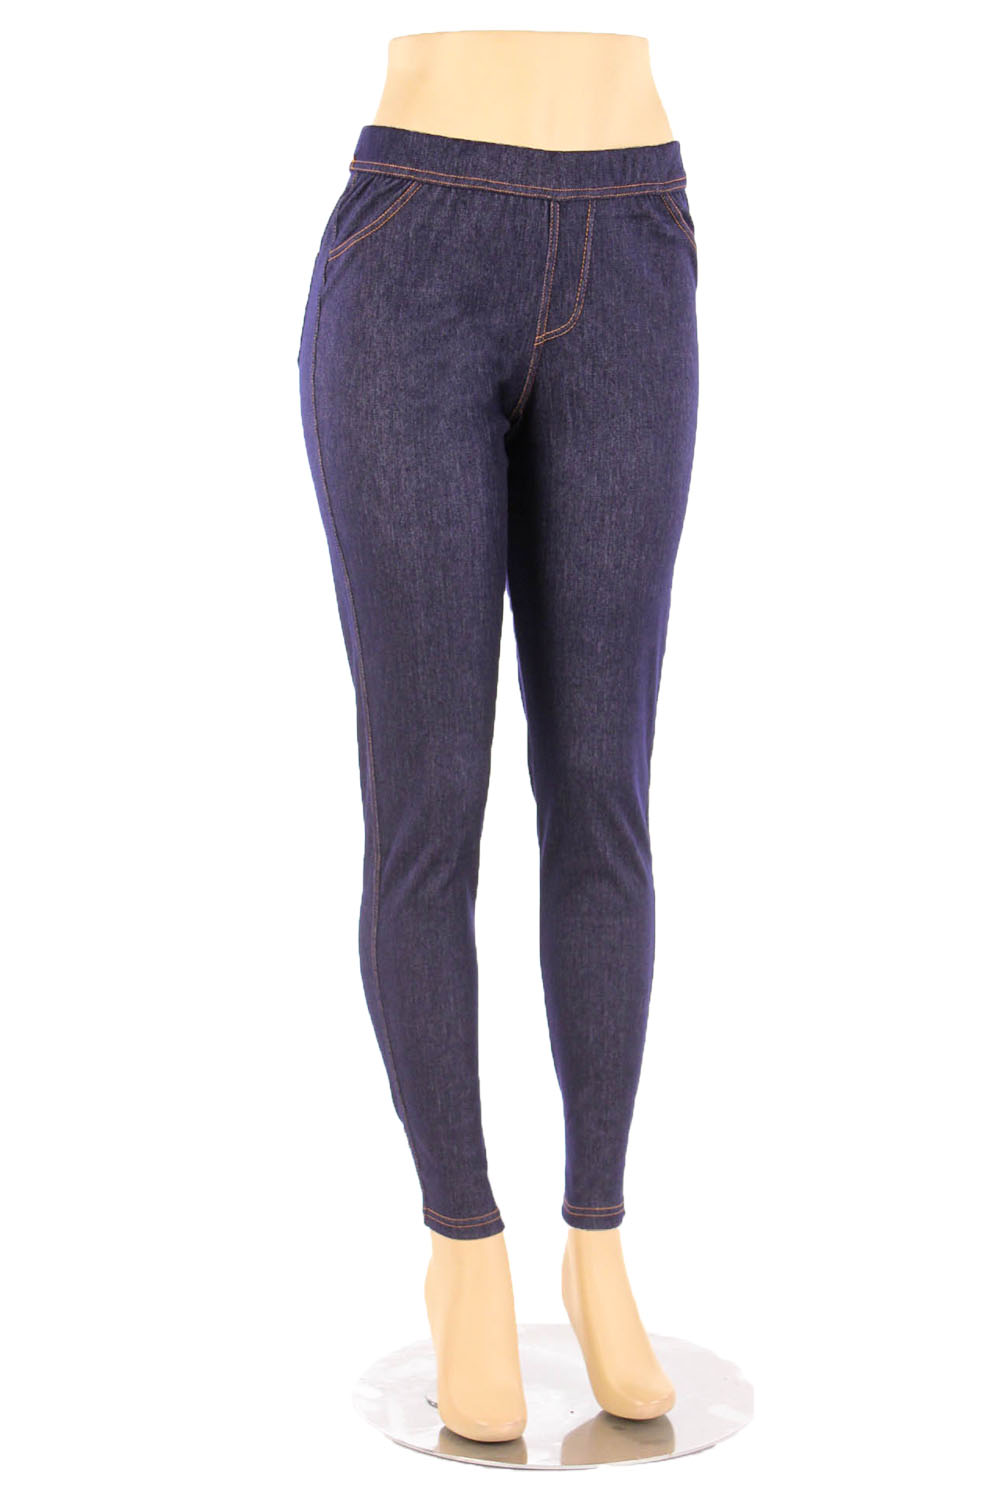 Jean Leggings With Pockets Plus Size Tops  International Society of  Precision Agriculture